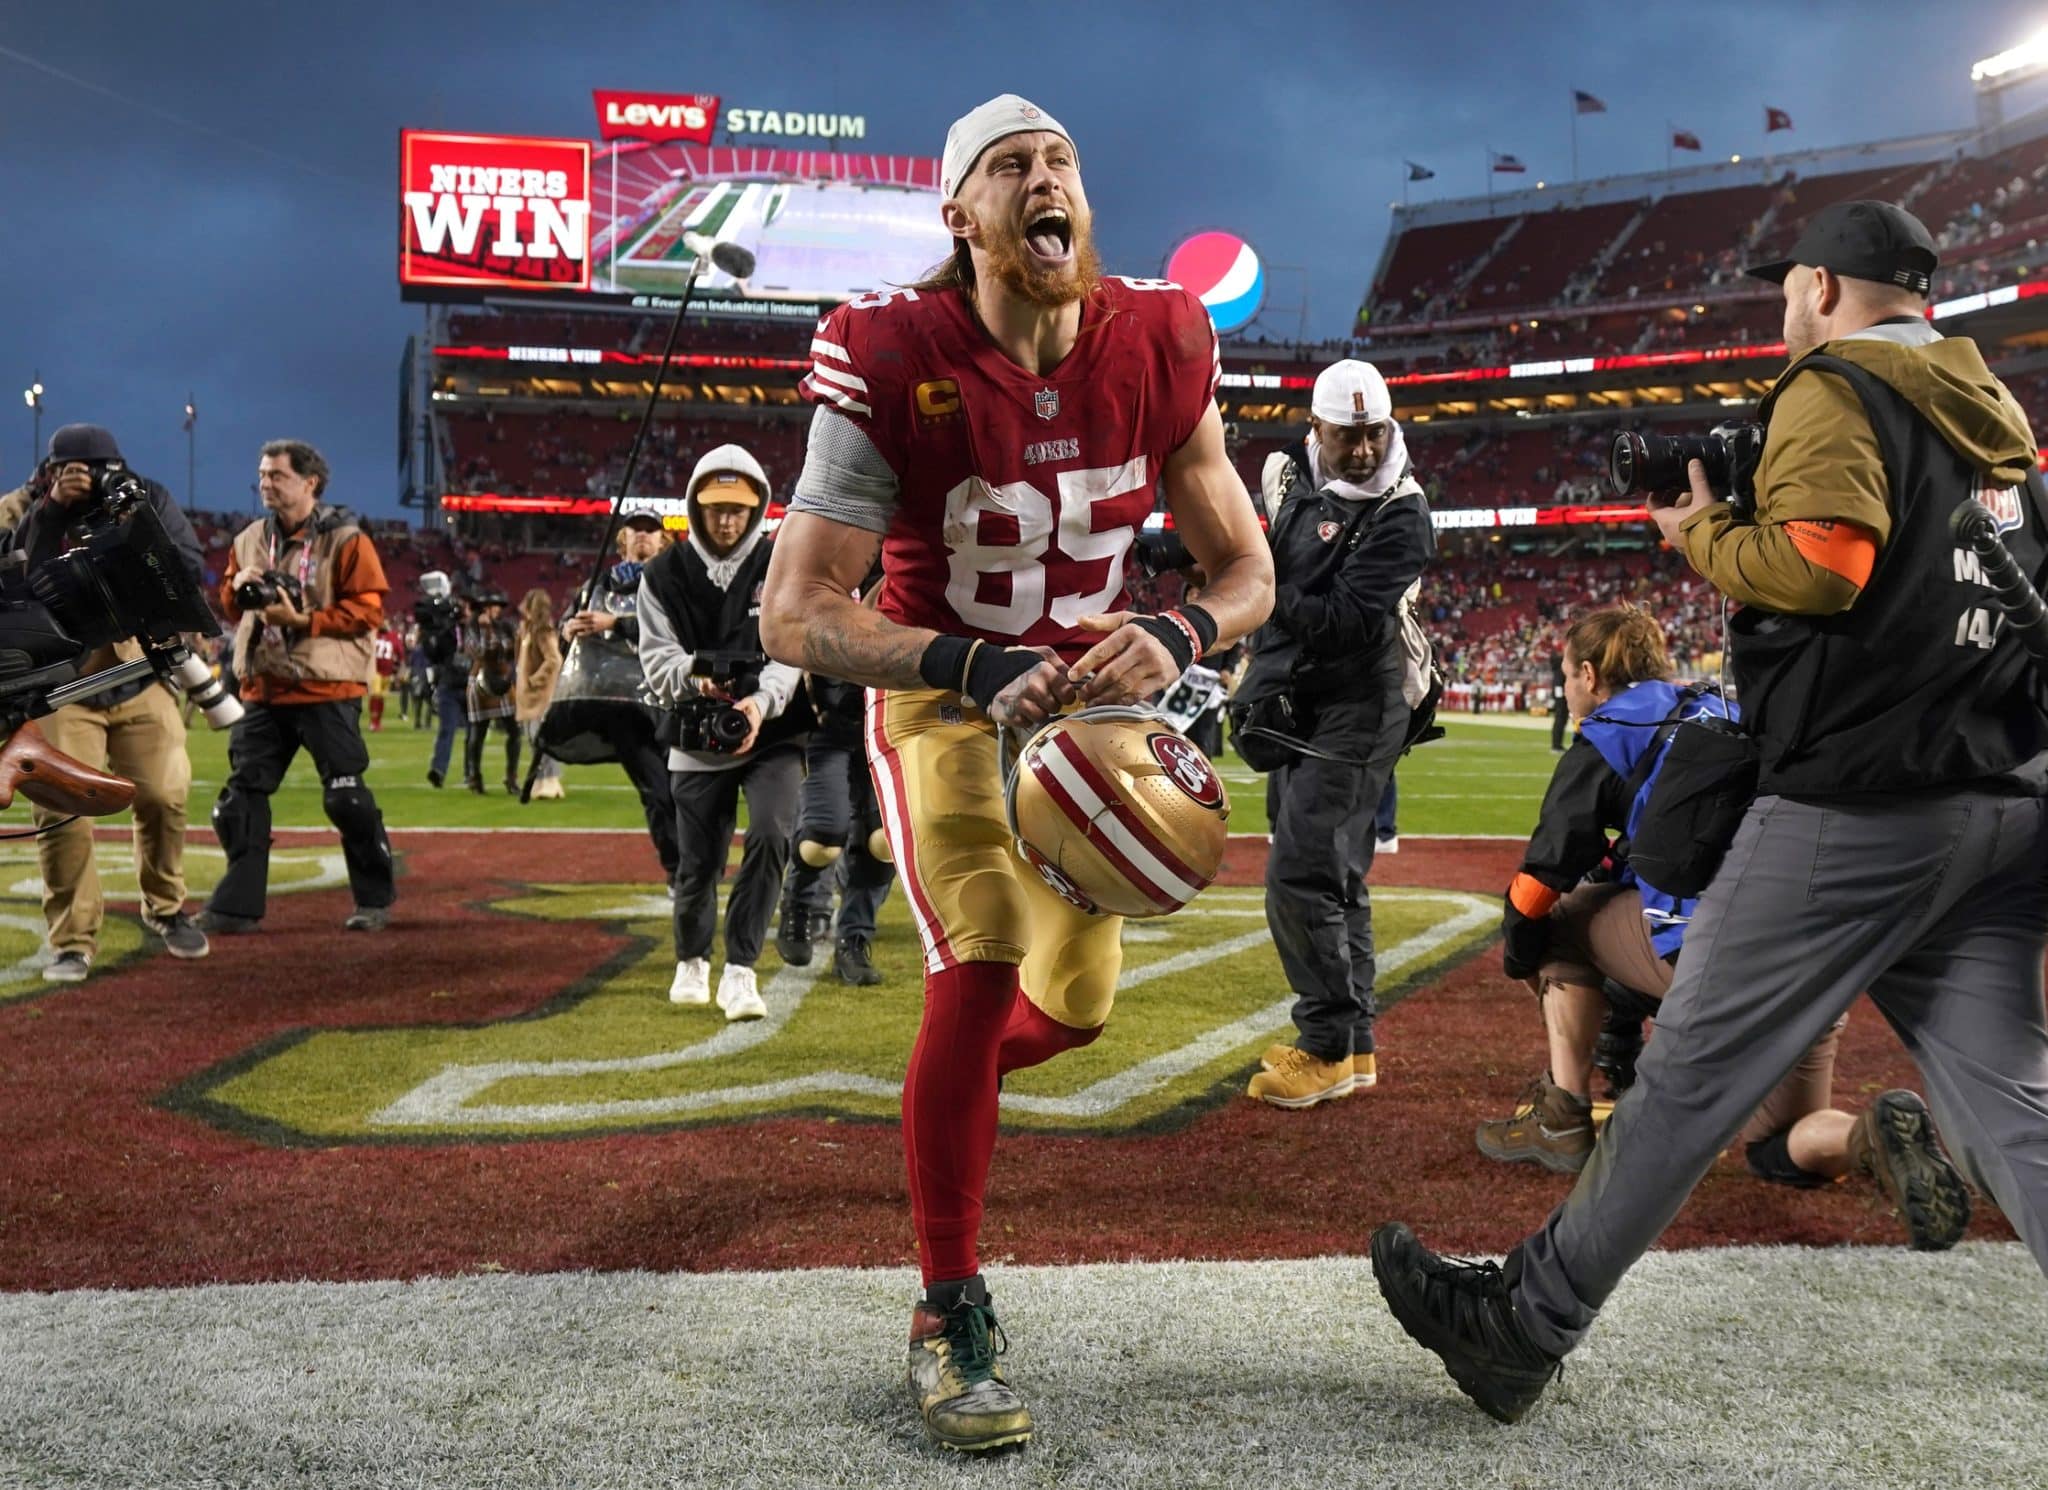 Meteorologist George Kittle Predicts a “Cold and Violent” NFC Championship Game